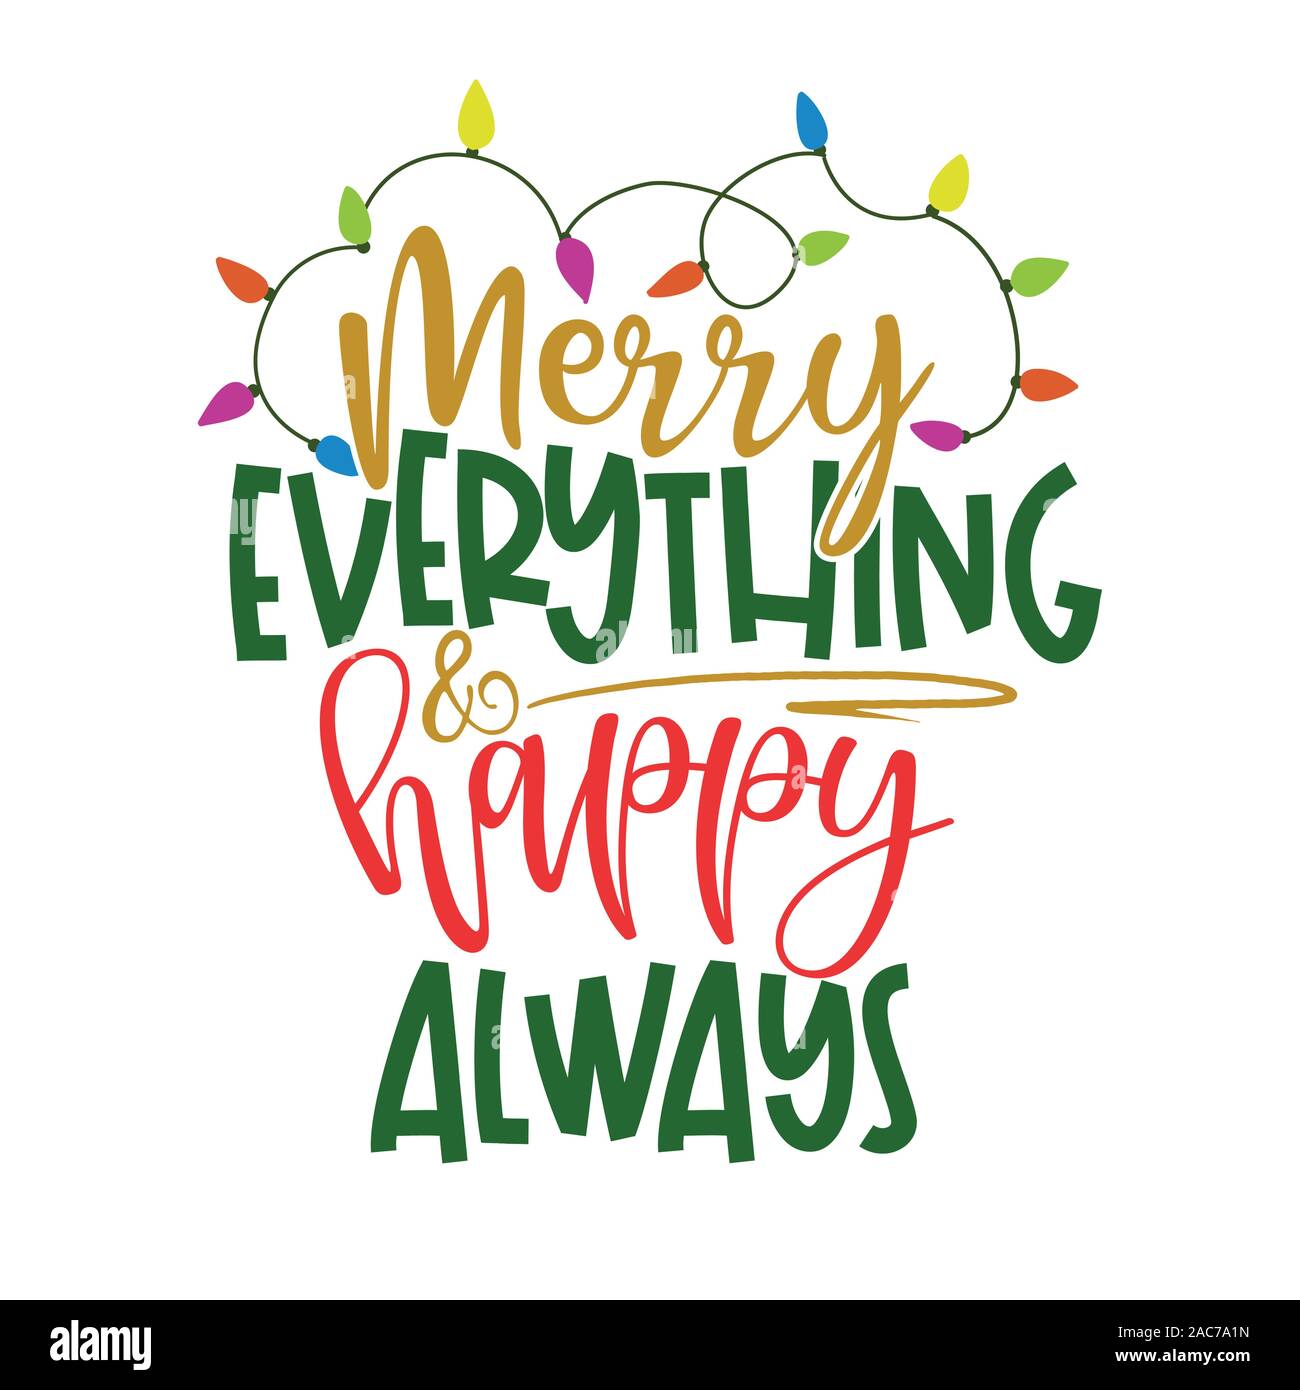 Merry everything and happy always - Funny calligraphy phrase for Christmas. Hand drawn lettering for Xmas greetings cards, invitations. Good for t-shi Stock Vector